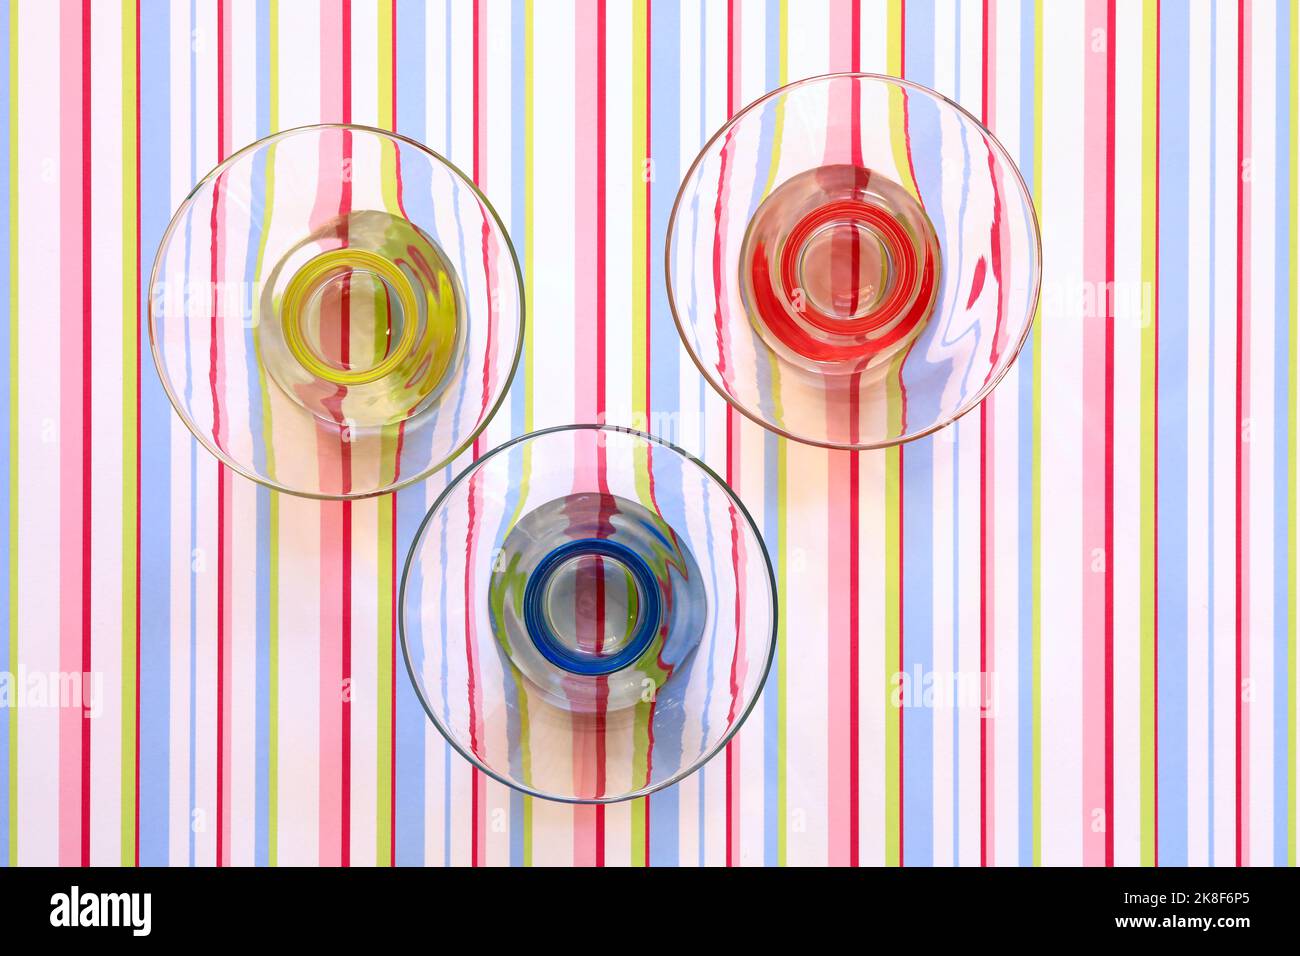 Red, yellow and blue bowls on a striped pattern Stock Photo